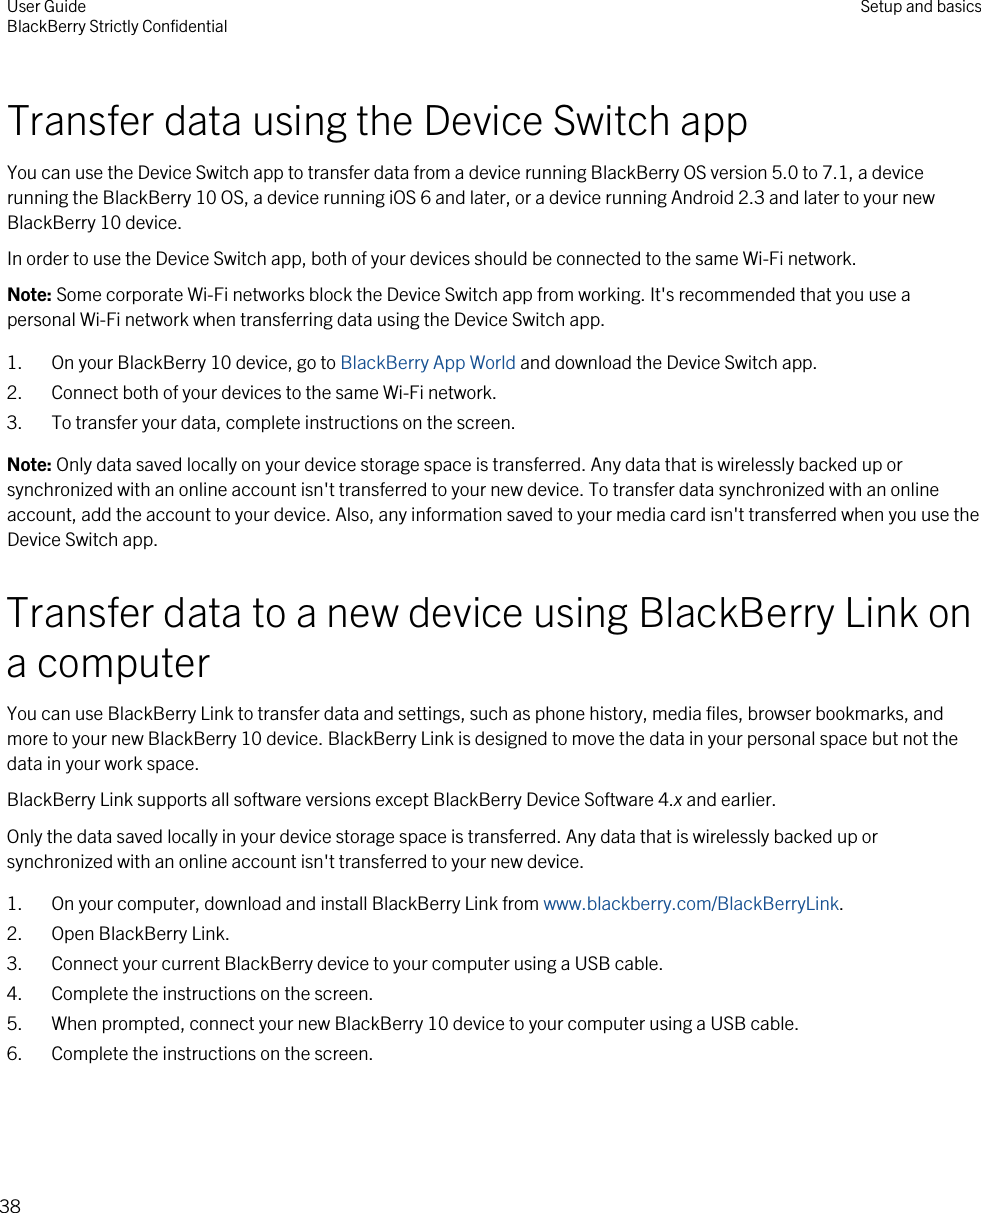 Transfer data using the Device Switch appYou can use the Device Switch app to transfer data from a device running BlackBerry OS version 5.0 to 7.1, a device running the BlackBerry 10 OS, a device running iOS 6 and later, or a device running Android 2.3 and later to your new BlackBerry 10 device.In order to use the Device Switch app, both of your devices should be connected to the same Wi-Fi network.Note: Some corporate Wi-Fi networks block the Device Switch app from working. It&apos;s recommended that you use a personal Wi-Fi network when transferring data using the Device Switch app.1. On your BlackBerry 10 device, go to BlackBerry App World and download the Device Switch app.2. Connect both of your devices to the same Wi-Fi network.3. To transfer your data, complete instructions on the screen.Note: Only data saved locally on your device storage space is transferred. Any data that is wirelessly backed up or synchronized with an online account isn&apos;t transferred to your new device. To transfer data synchronized with an online account, add the account to your device. Also, any information saved to your media card isn&apos;t transferred when you use the Device Switch app.Transfer data to a new device using BlackBerry Link on a computerYou can use BlackBerry Link to transfer data and settings, such as phone history, media files, browser bookmarks, and more to your new BlackBerry 10 device. BlackBerry Link is designed to move the data in your personal space but not the data in your work space.BlackBerry Link supports all software versions except BlackBerry Device Software 4.x and earlier.Only the data saved locally in your device storage space is transferred. Any data that is wirelessly backed up or synchronized with an online account isn&apos;t transferred to your new device.1. On your computer, download and install BlackBerry Link from www.blackberry.com/BlackBerryLink.2. Open BlackBerry Link.3. Connect your current BlackBerry device to your computer using a USB cable.4. Complete the instructions on the screen.5. When prompted, connect your new BlackBerry 10 device to your computer using a USB cable.6. Complete the instructions on the screen.User GuideBlackBerry Strictly Confidential Setup and basics38